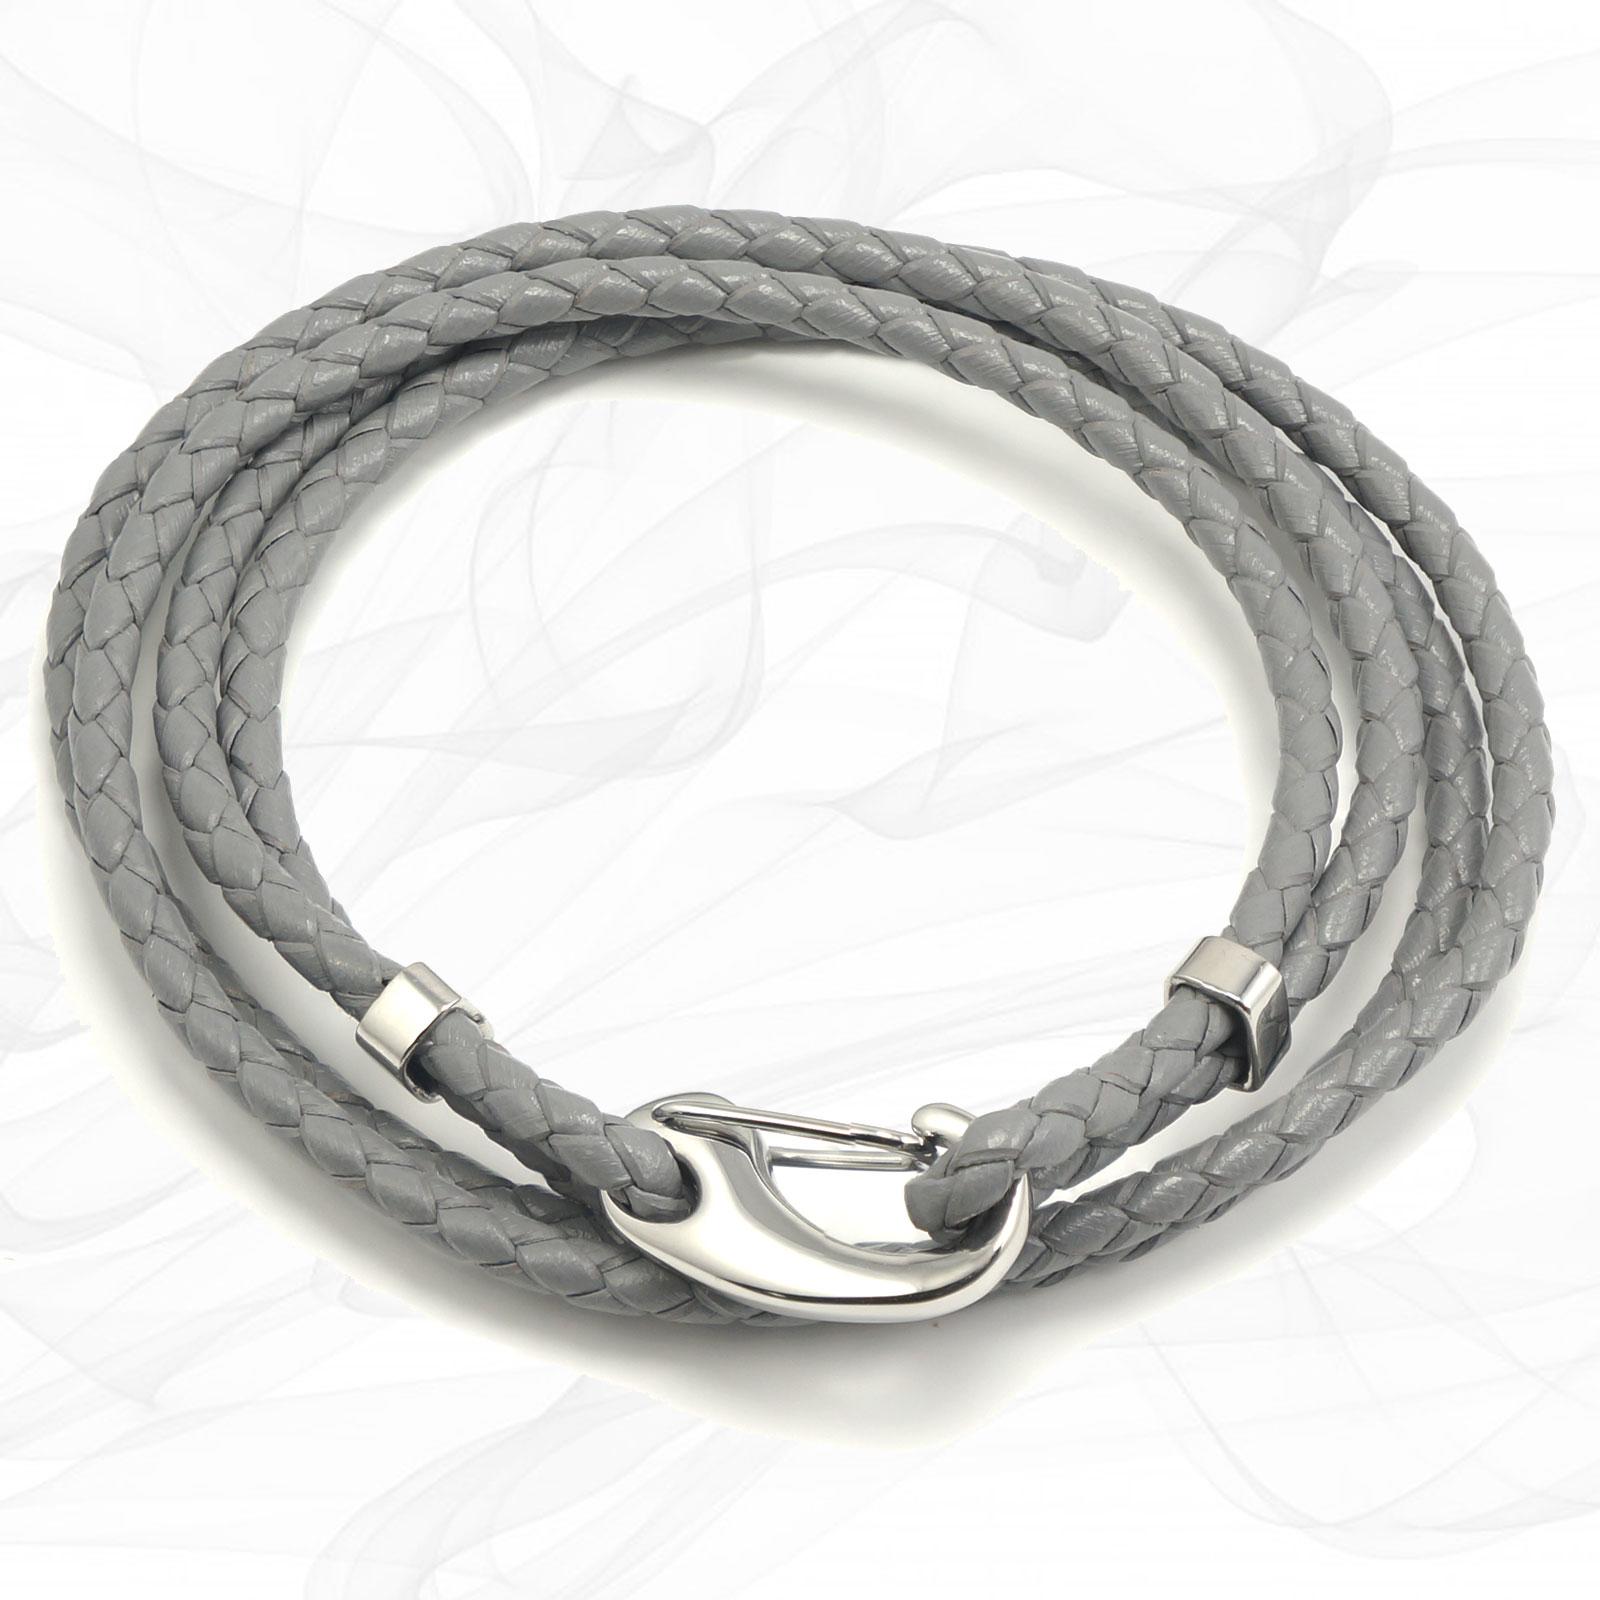 Grey Four Strap Bolo Leather Bracelet with a Petit Steel Lobster Clasp